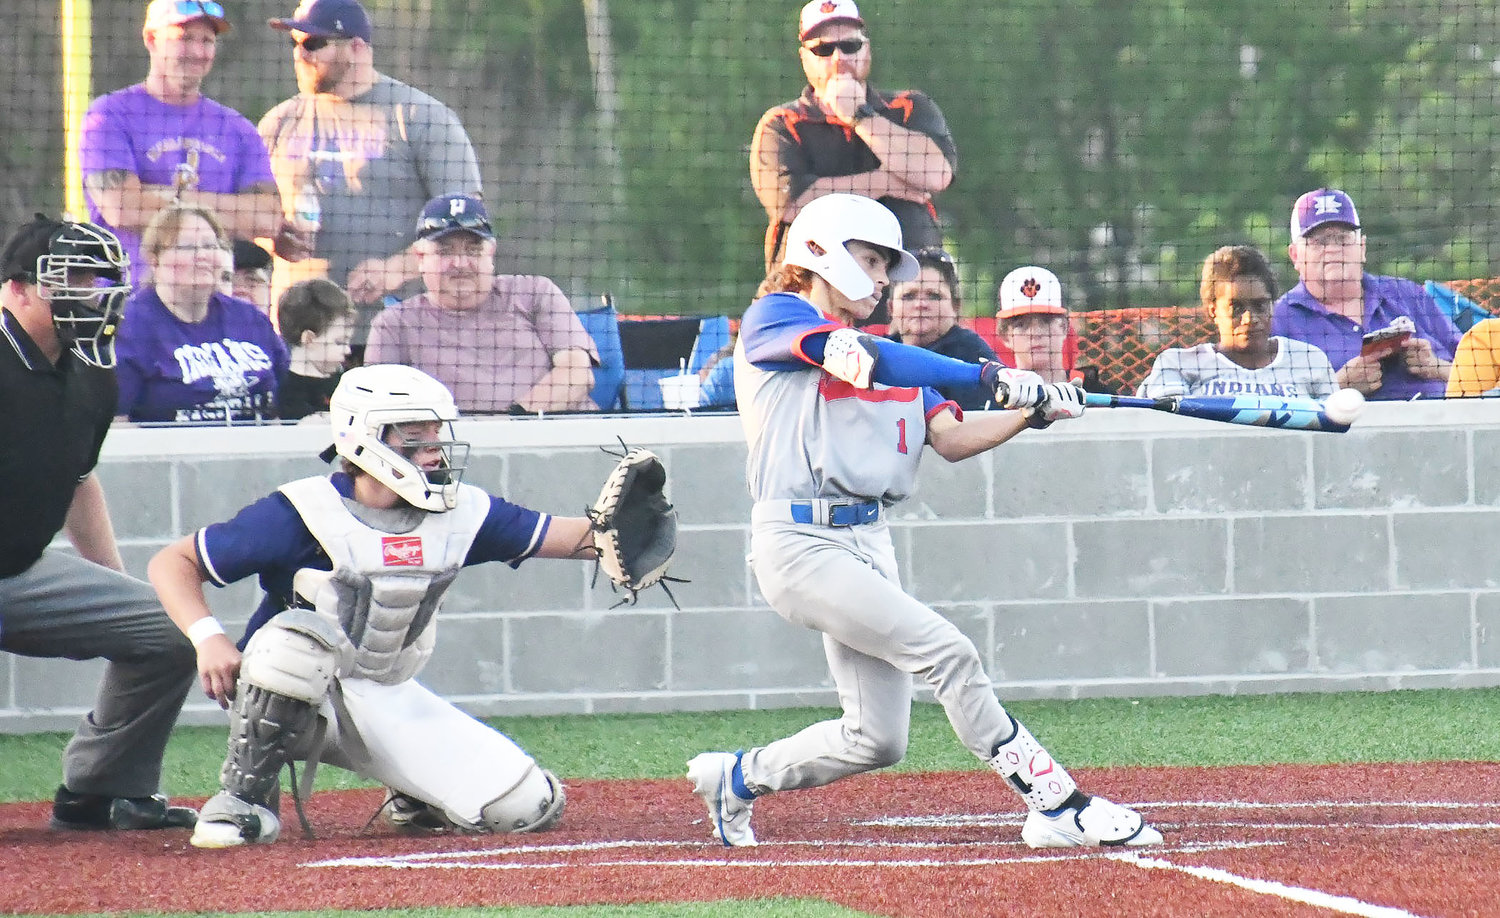 Moberly’s Braedon Hunt singled this pitch into left field during Monday’s Class 4 District 7 semifinal game at Macon. Hunt went 1-for-2 with a walk and scored the Spartans’ lone run in an 8-1 loss to Hallsville.